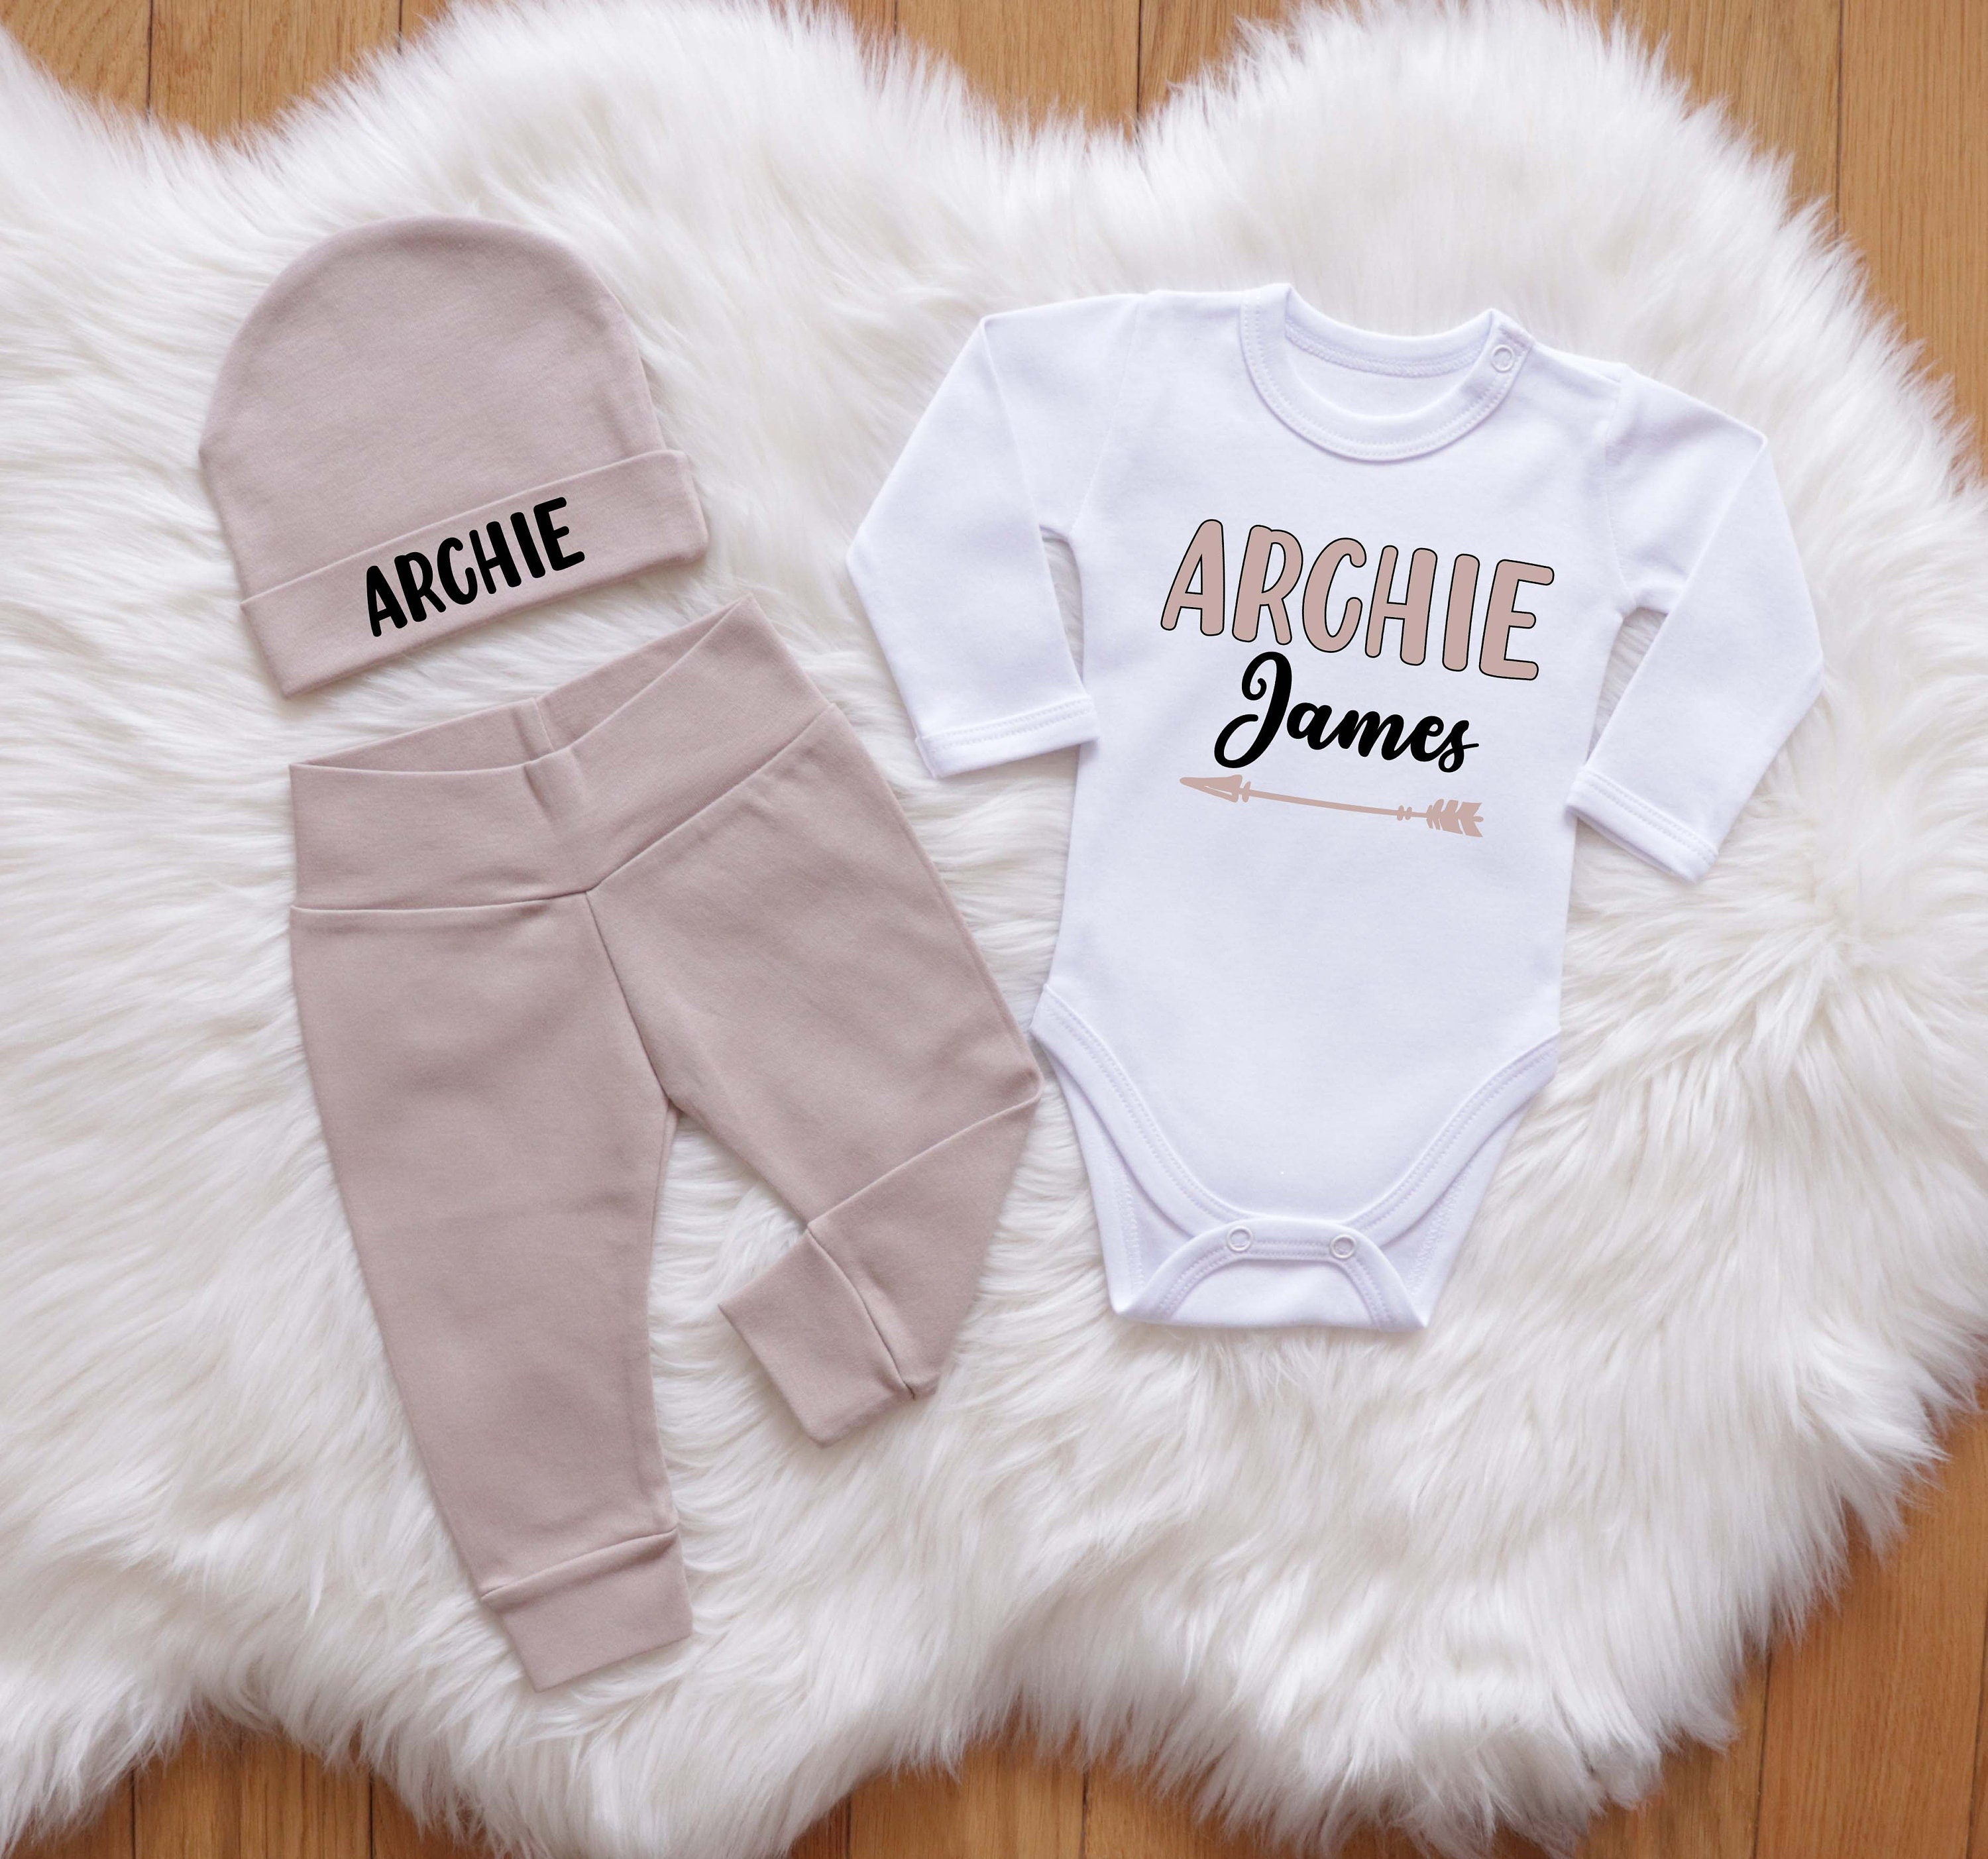 Baby Boy Outfit Sets – Wonderfully Made